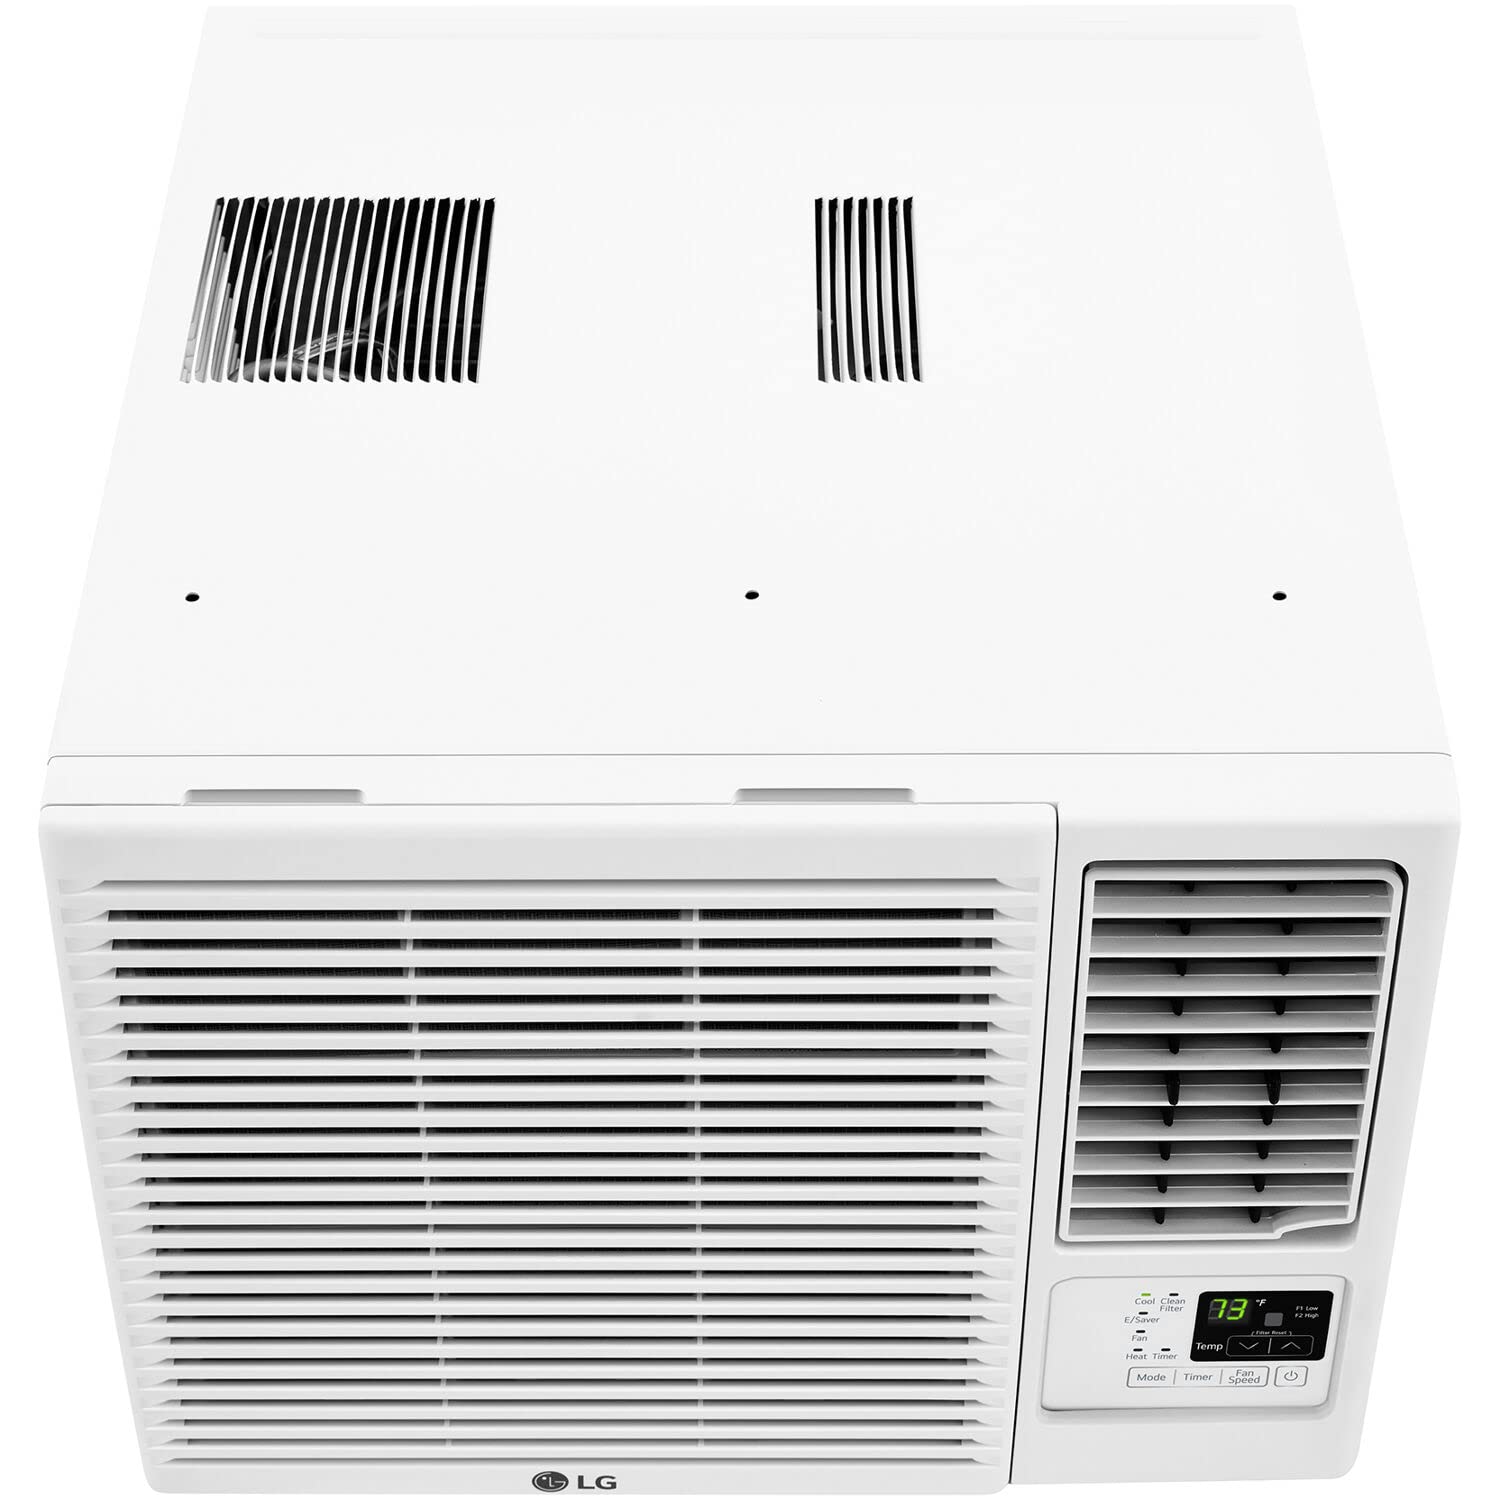 LG 8,000 BTU Heat and Cool Window Air Conditioner with Wifi Controls